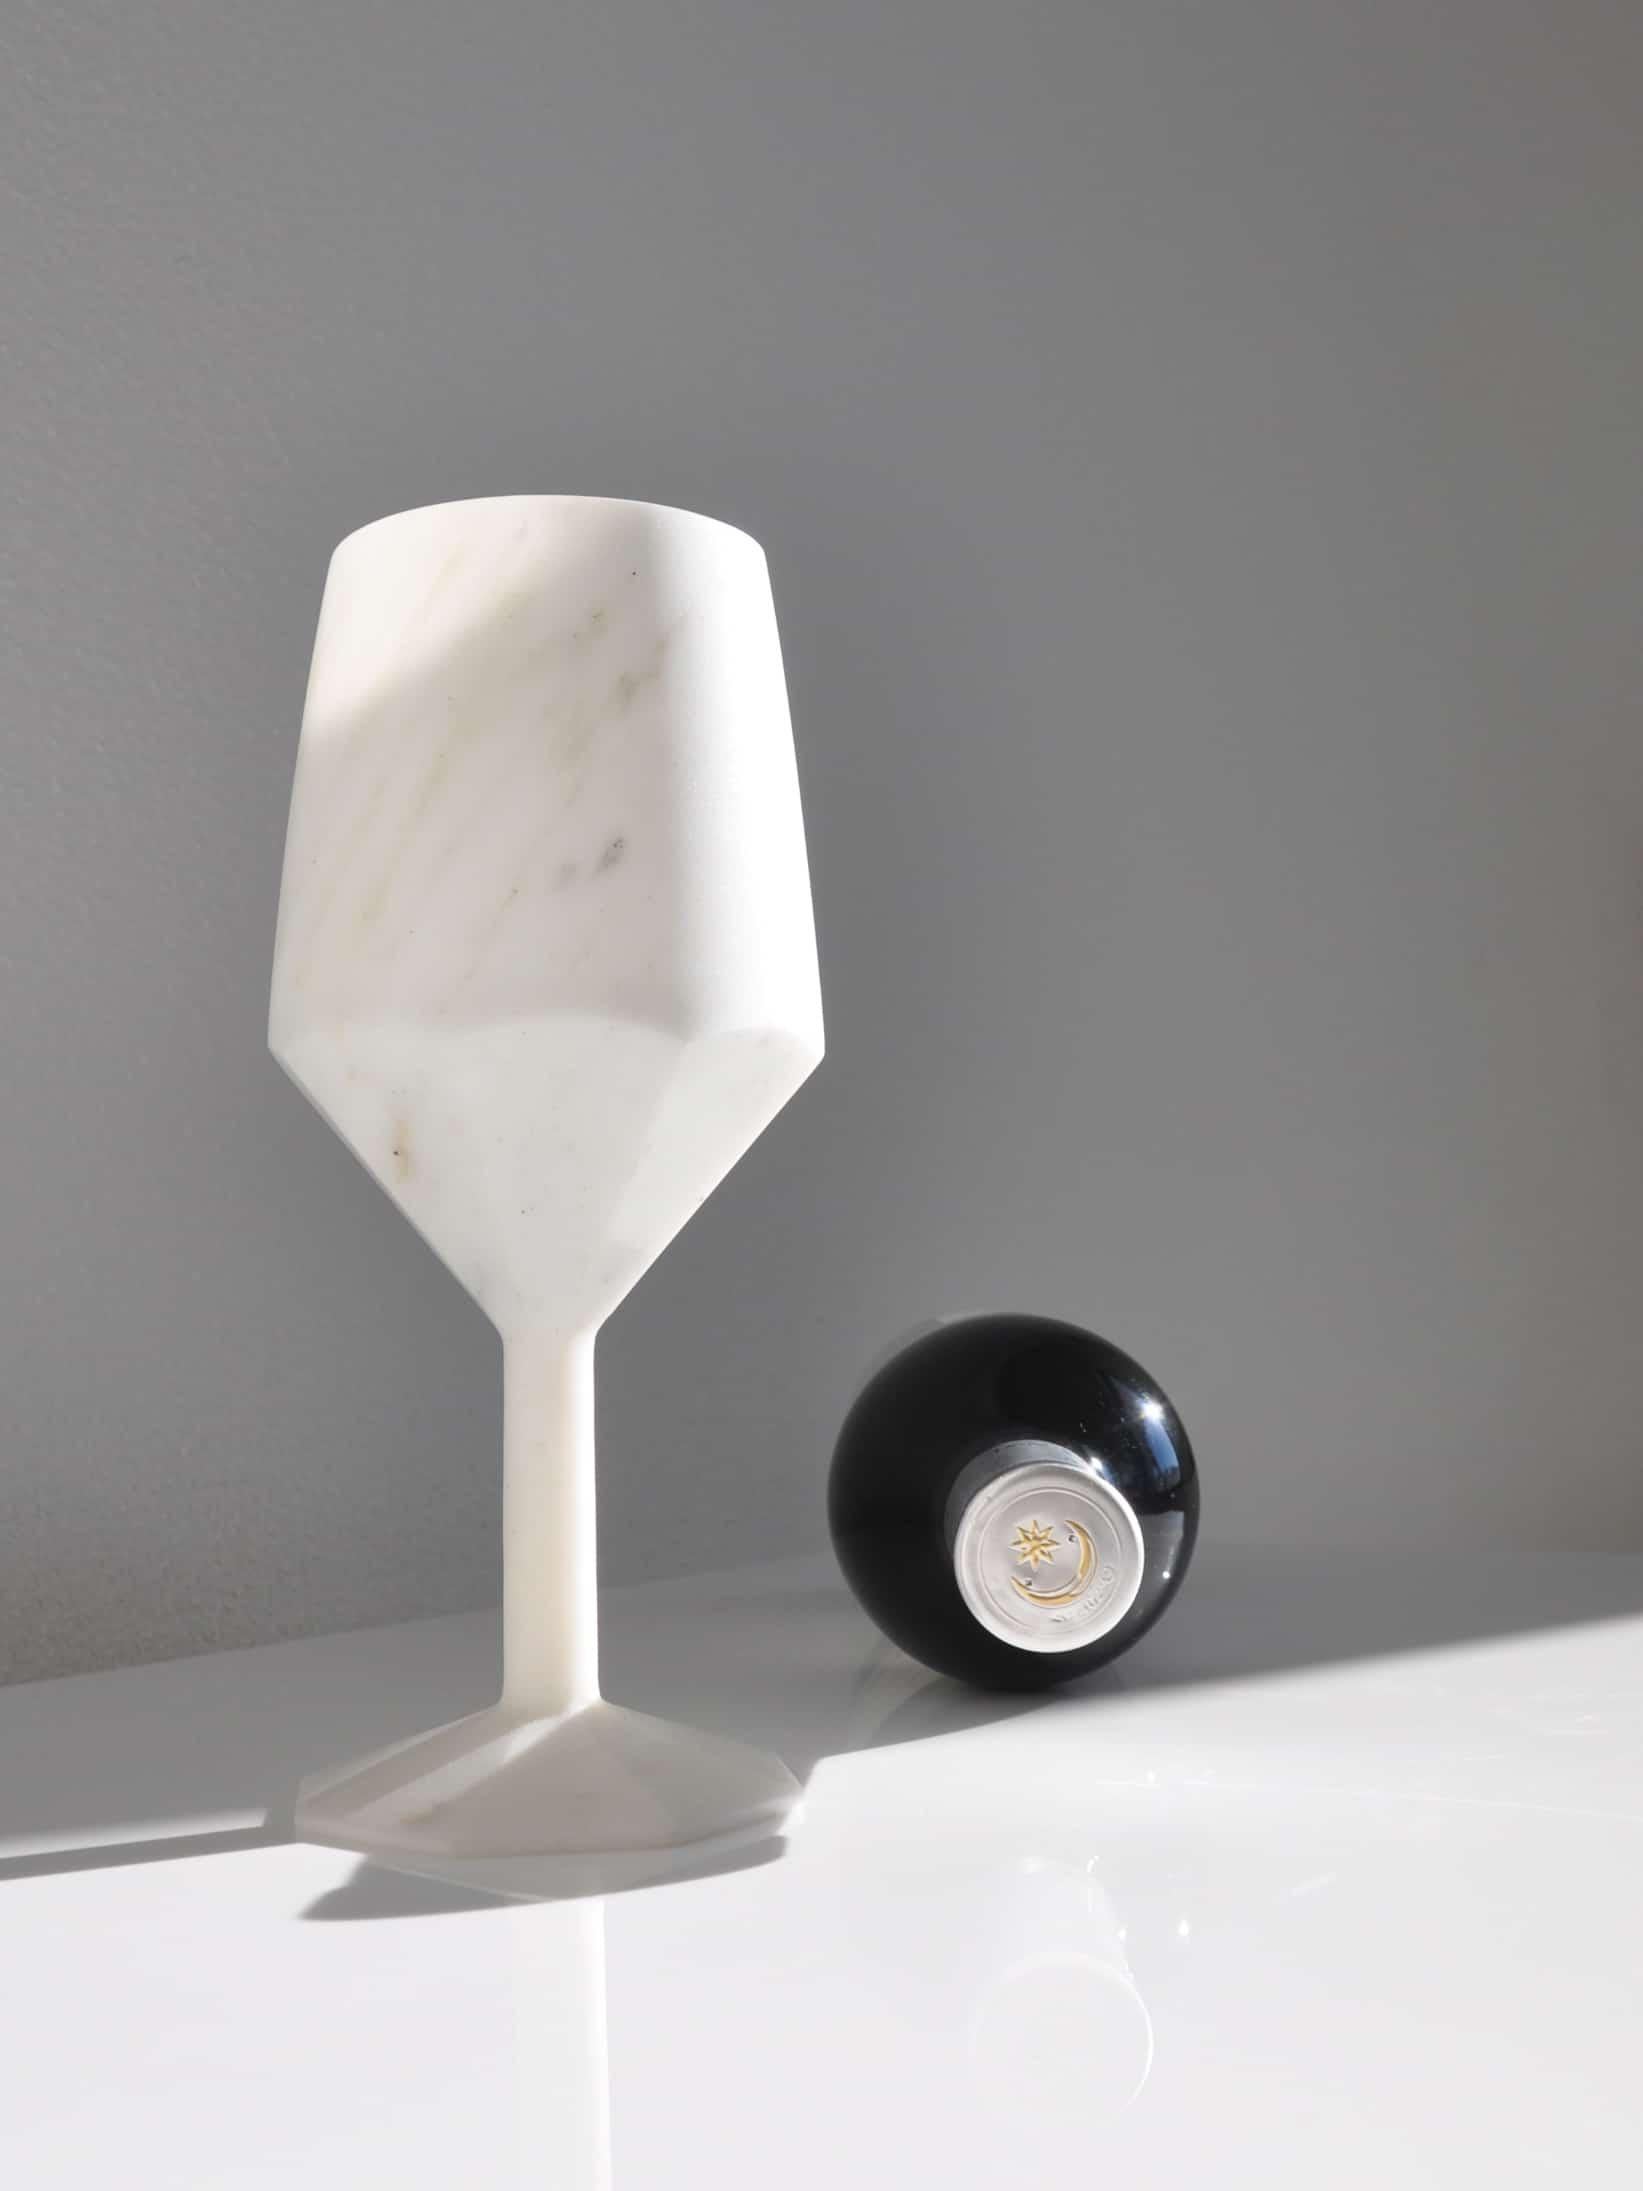 Hand-Crafted Handmade Cocktail Glass in Satin White Carrara Marble For Sale